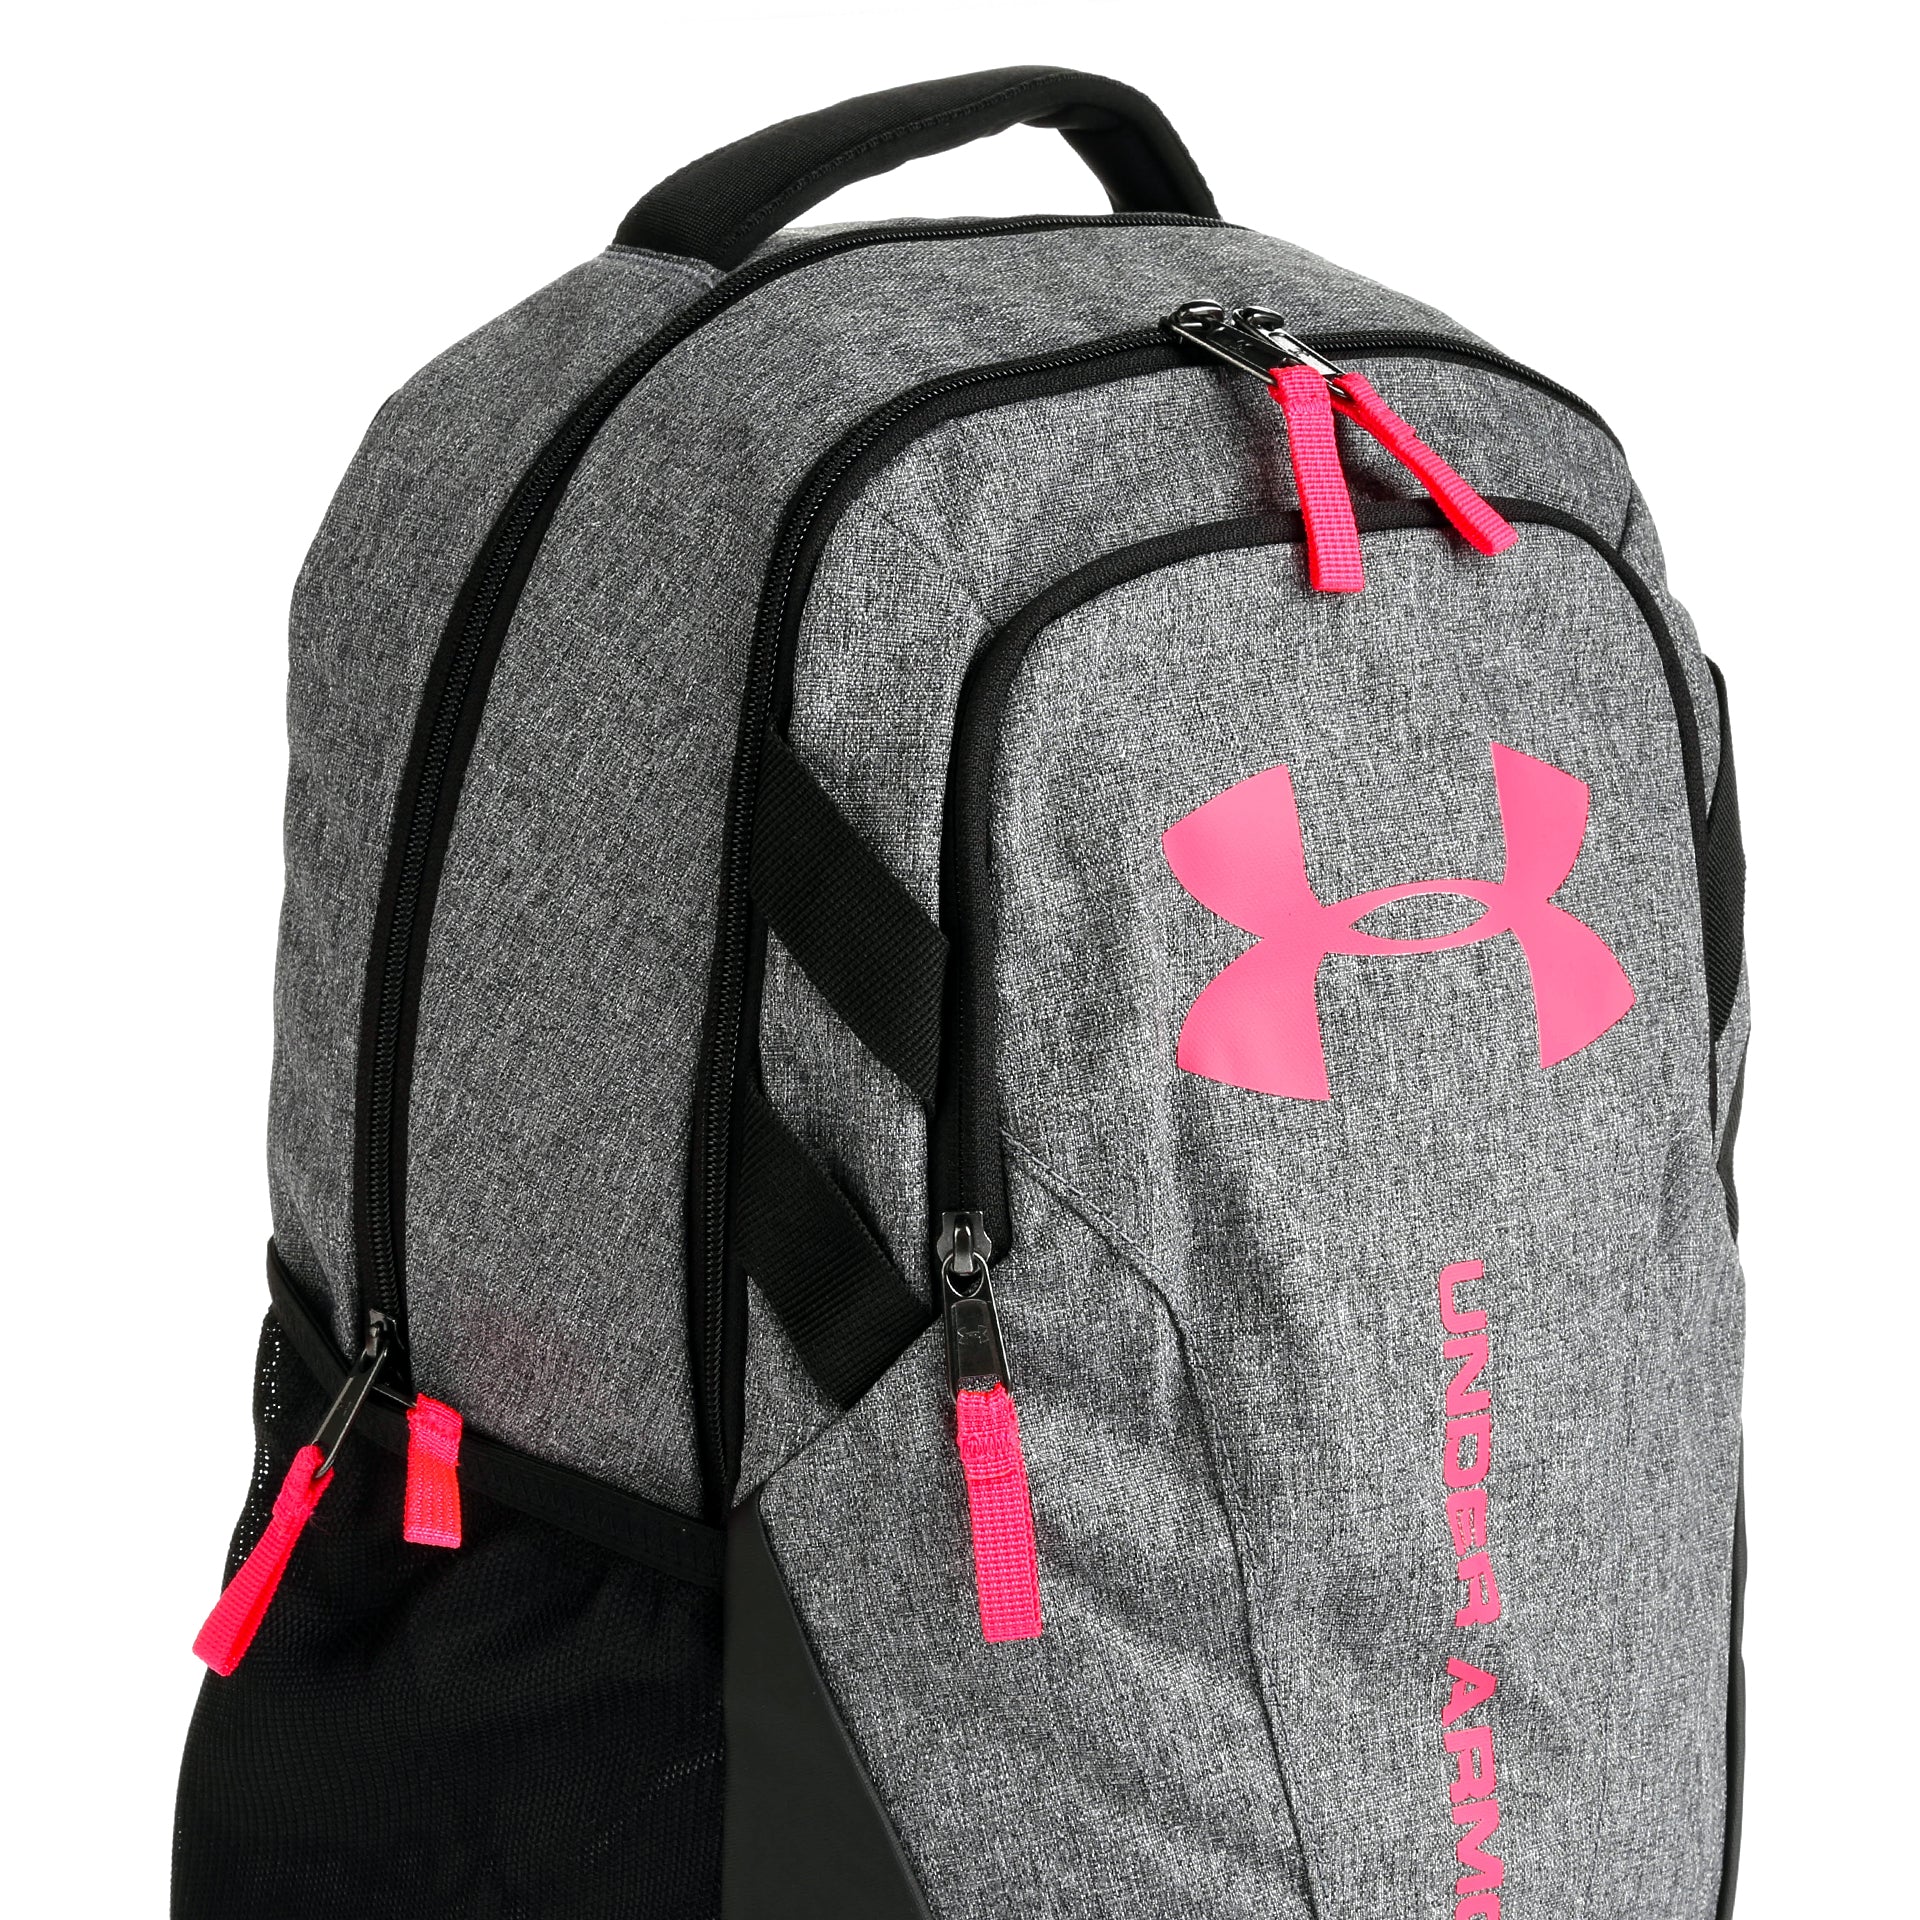 Under Armour Hustle 3.0 Backpack - Heather Grey / Pink - New Star